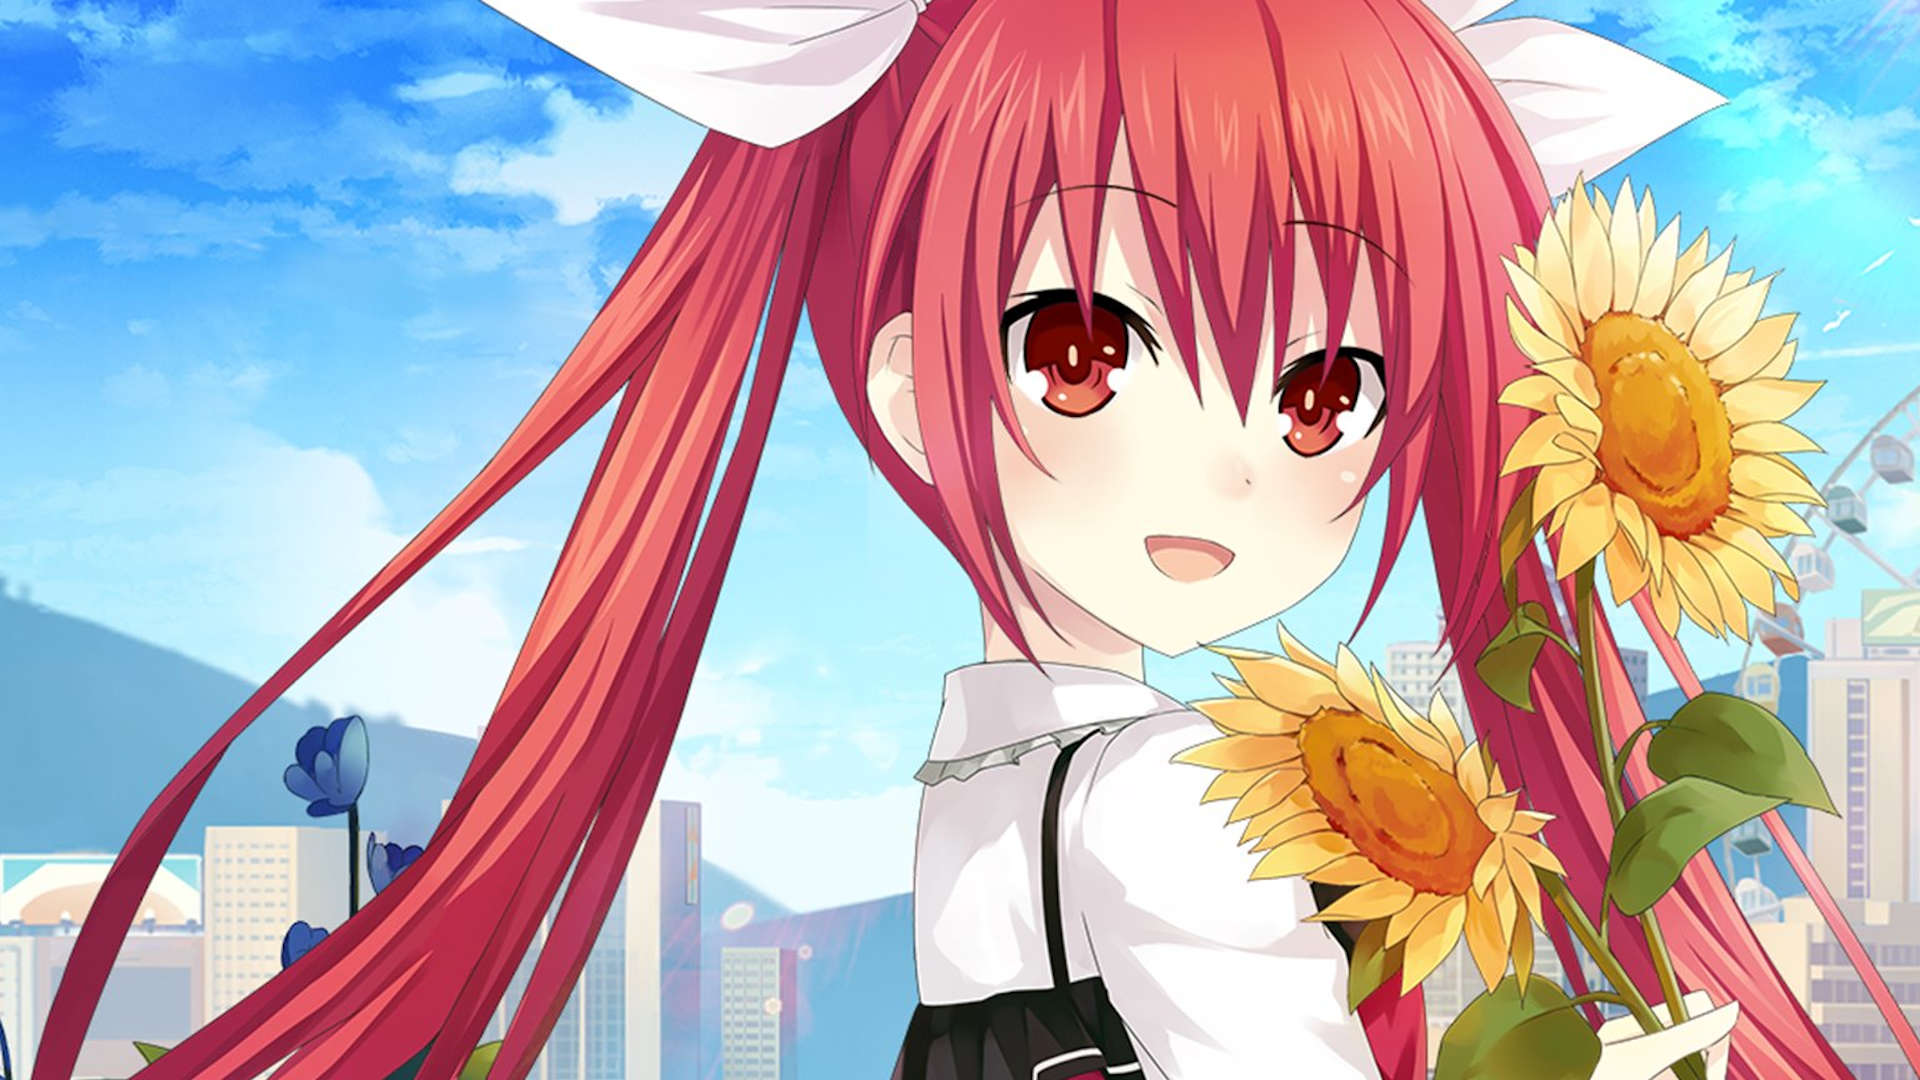 Date A Live Announces New Anime Project